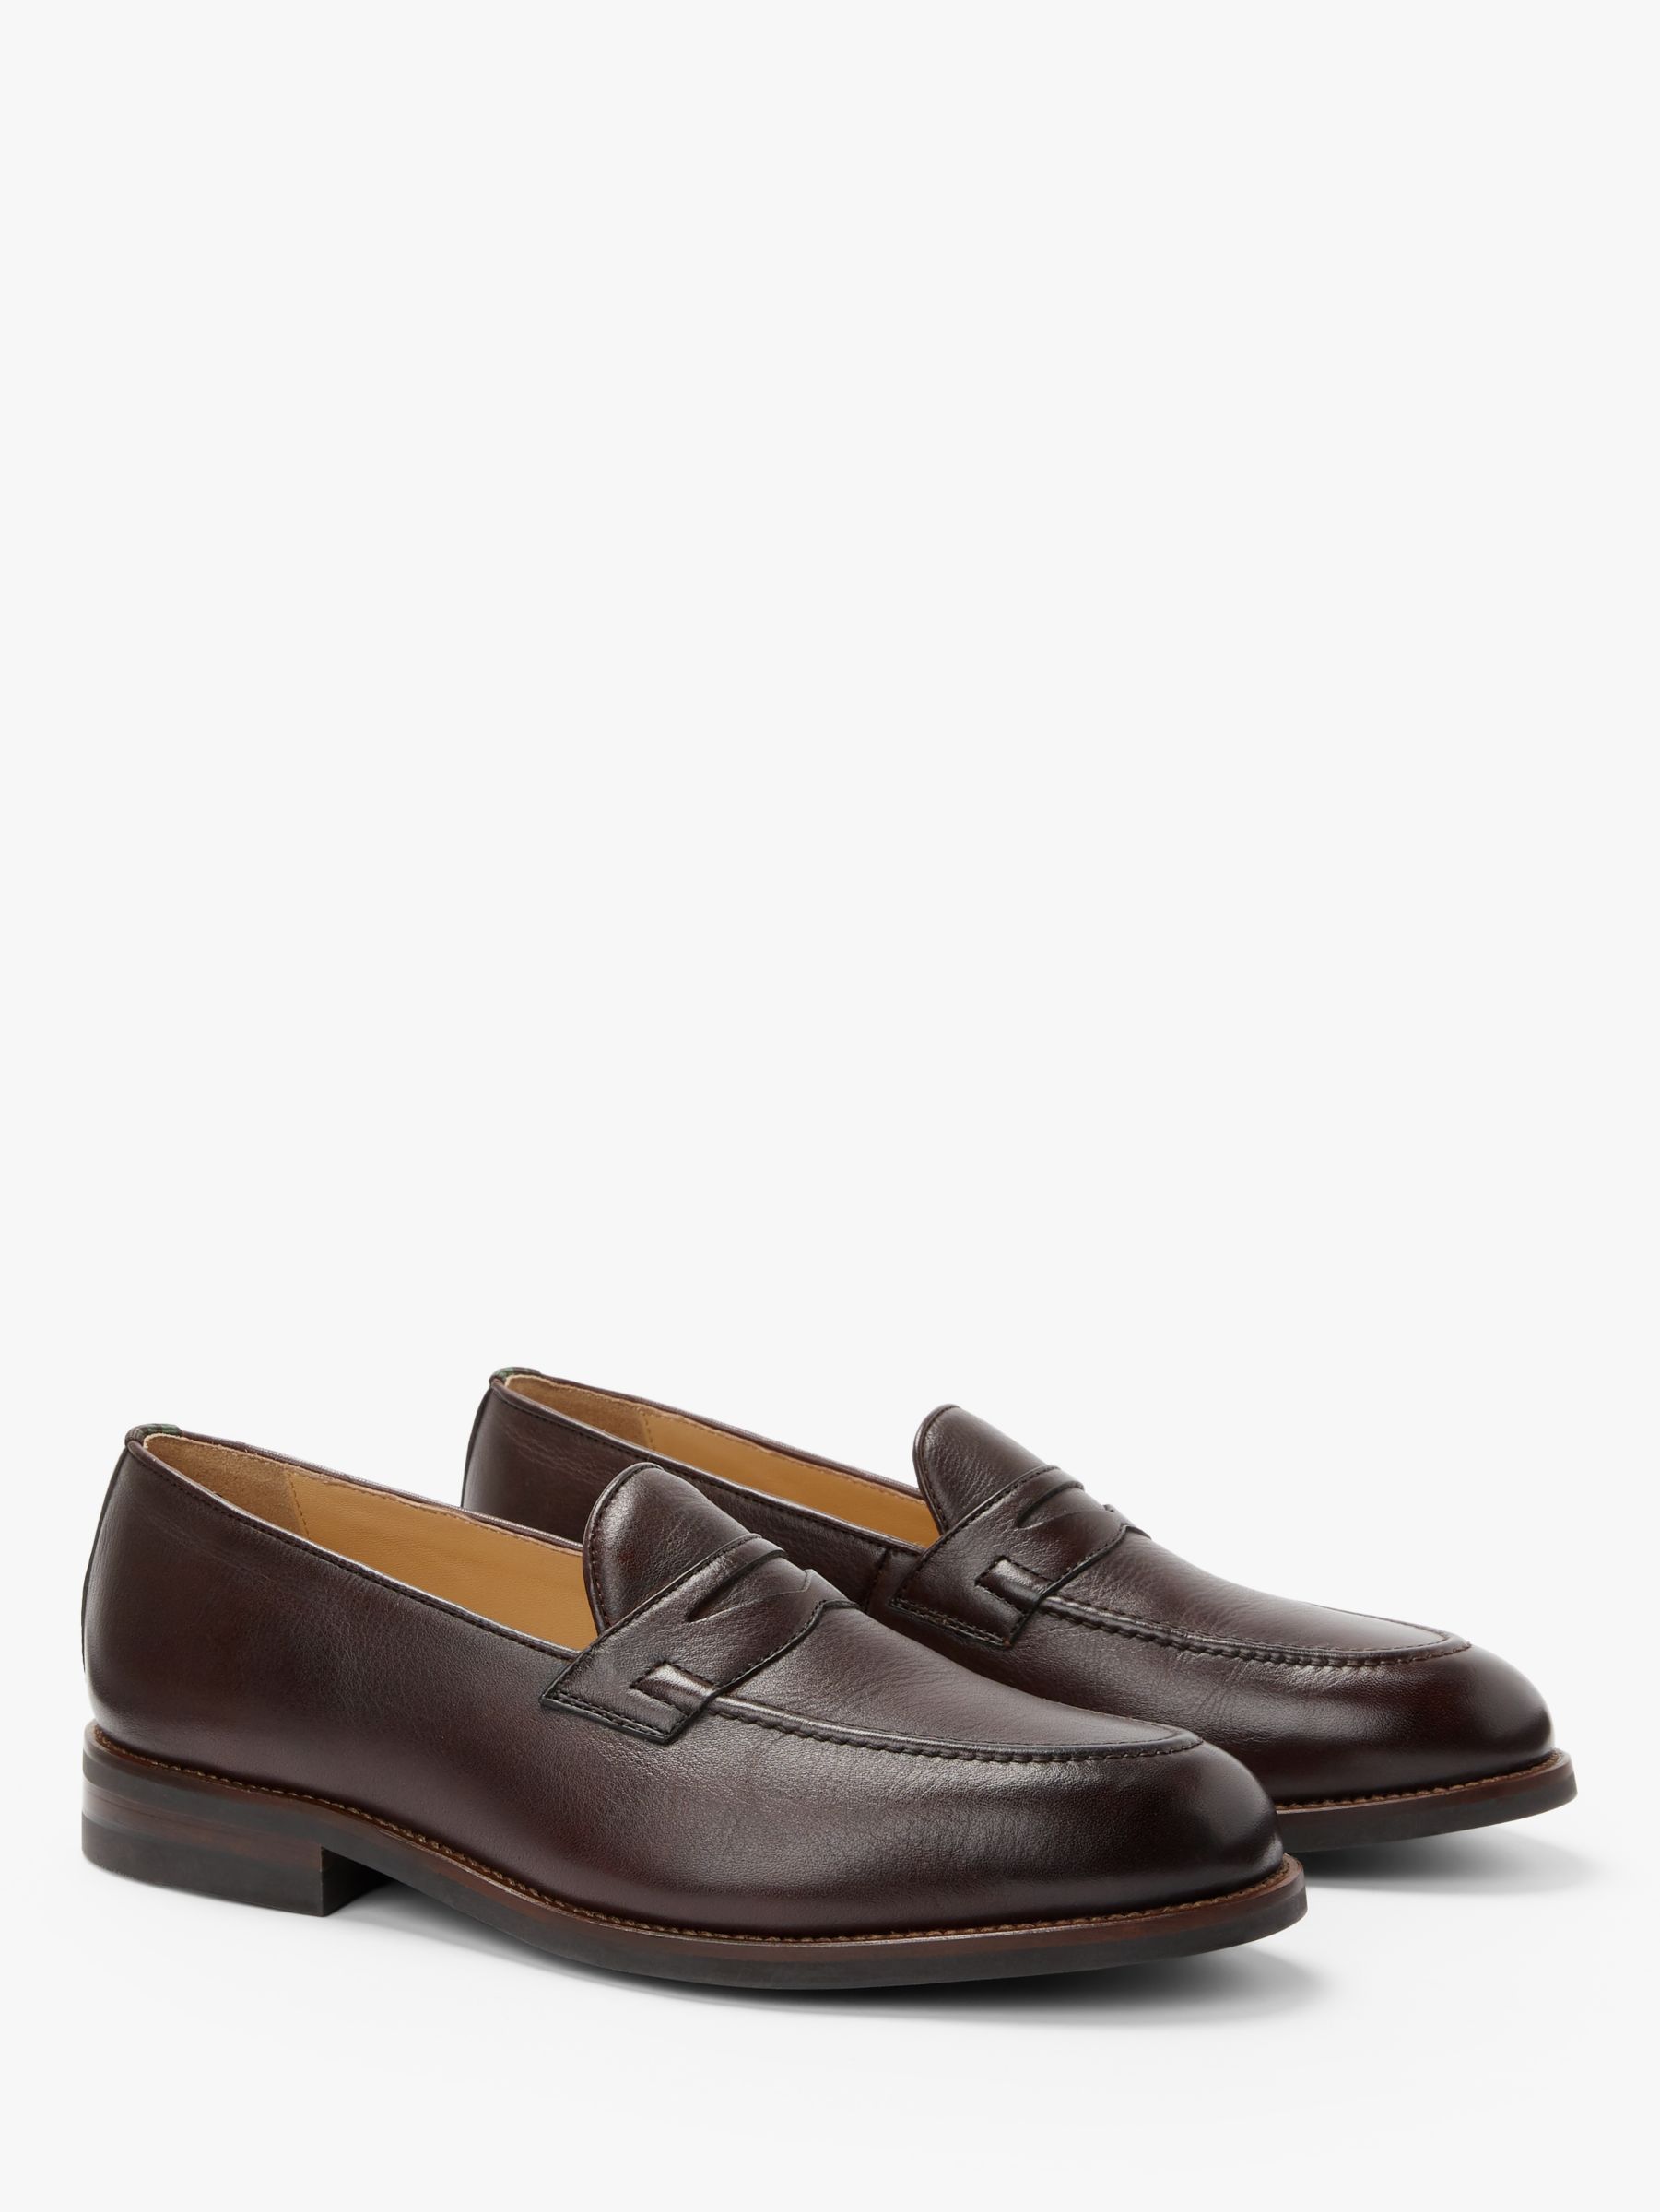 John Lewis & Partners Burlington Leather Penny Loafers, Red Choco at ...